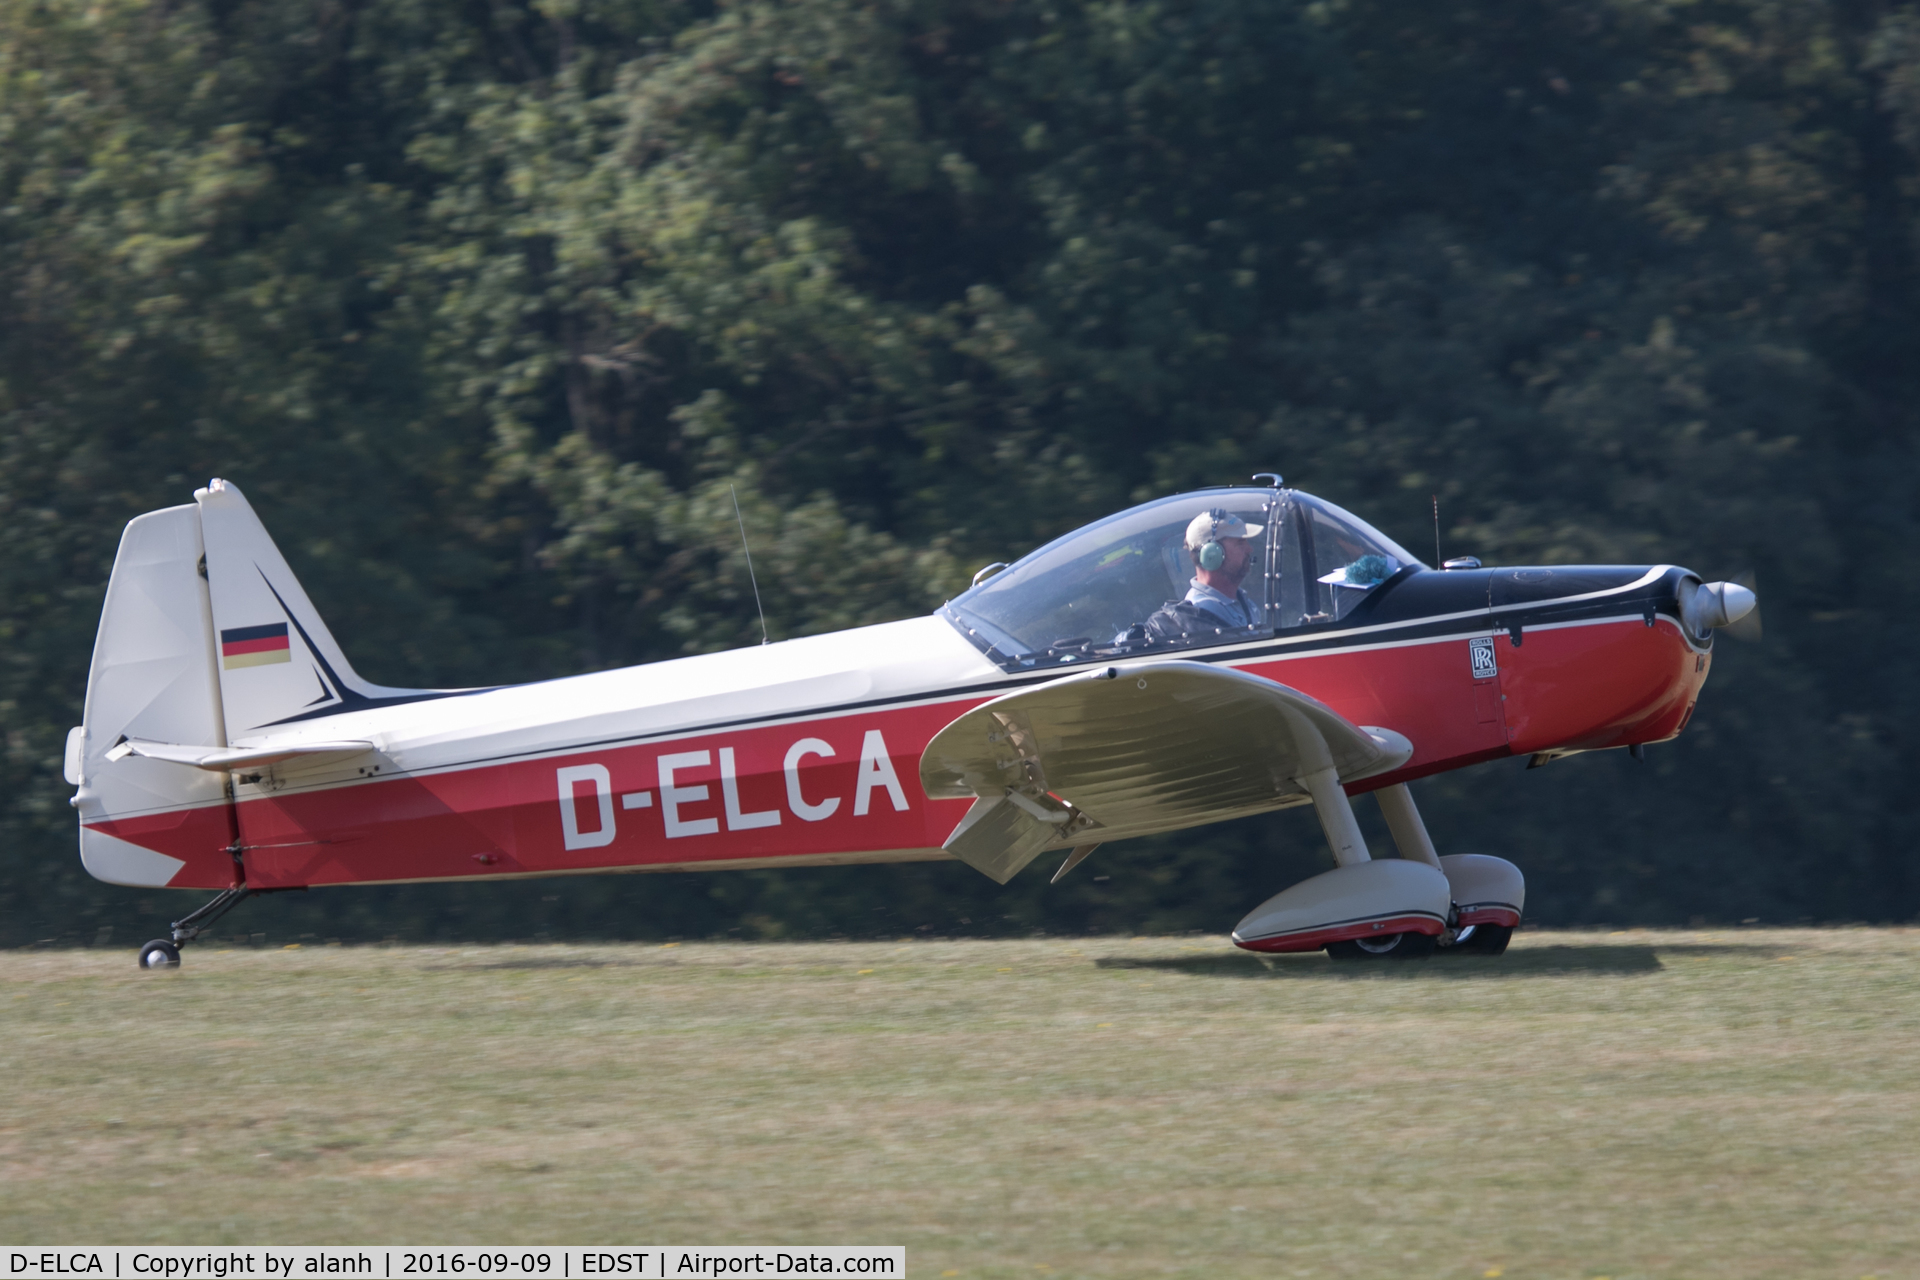 D-ELCA, 1967 Binder CP-301S Smaragd C/N AB.434, Rolling out on arrival at the 2016 Hahnweide Oldtimer Fliegertreffen